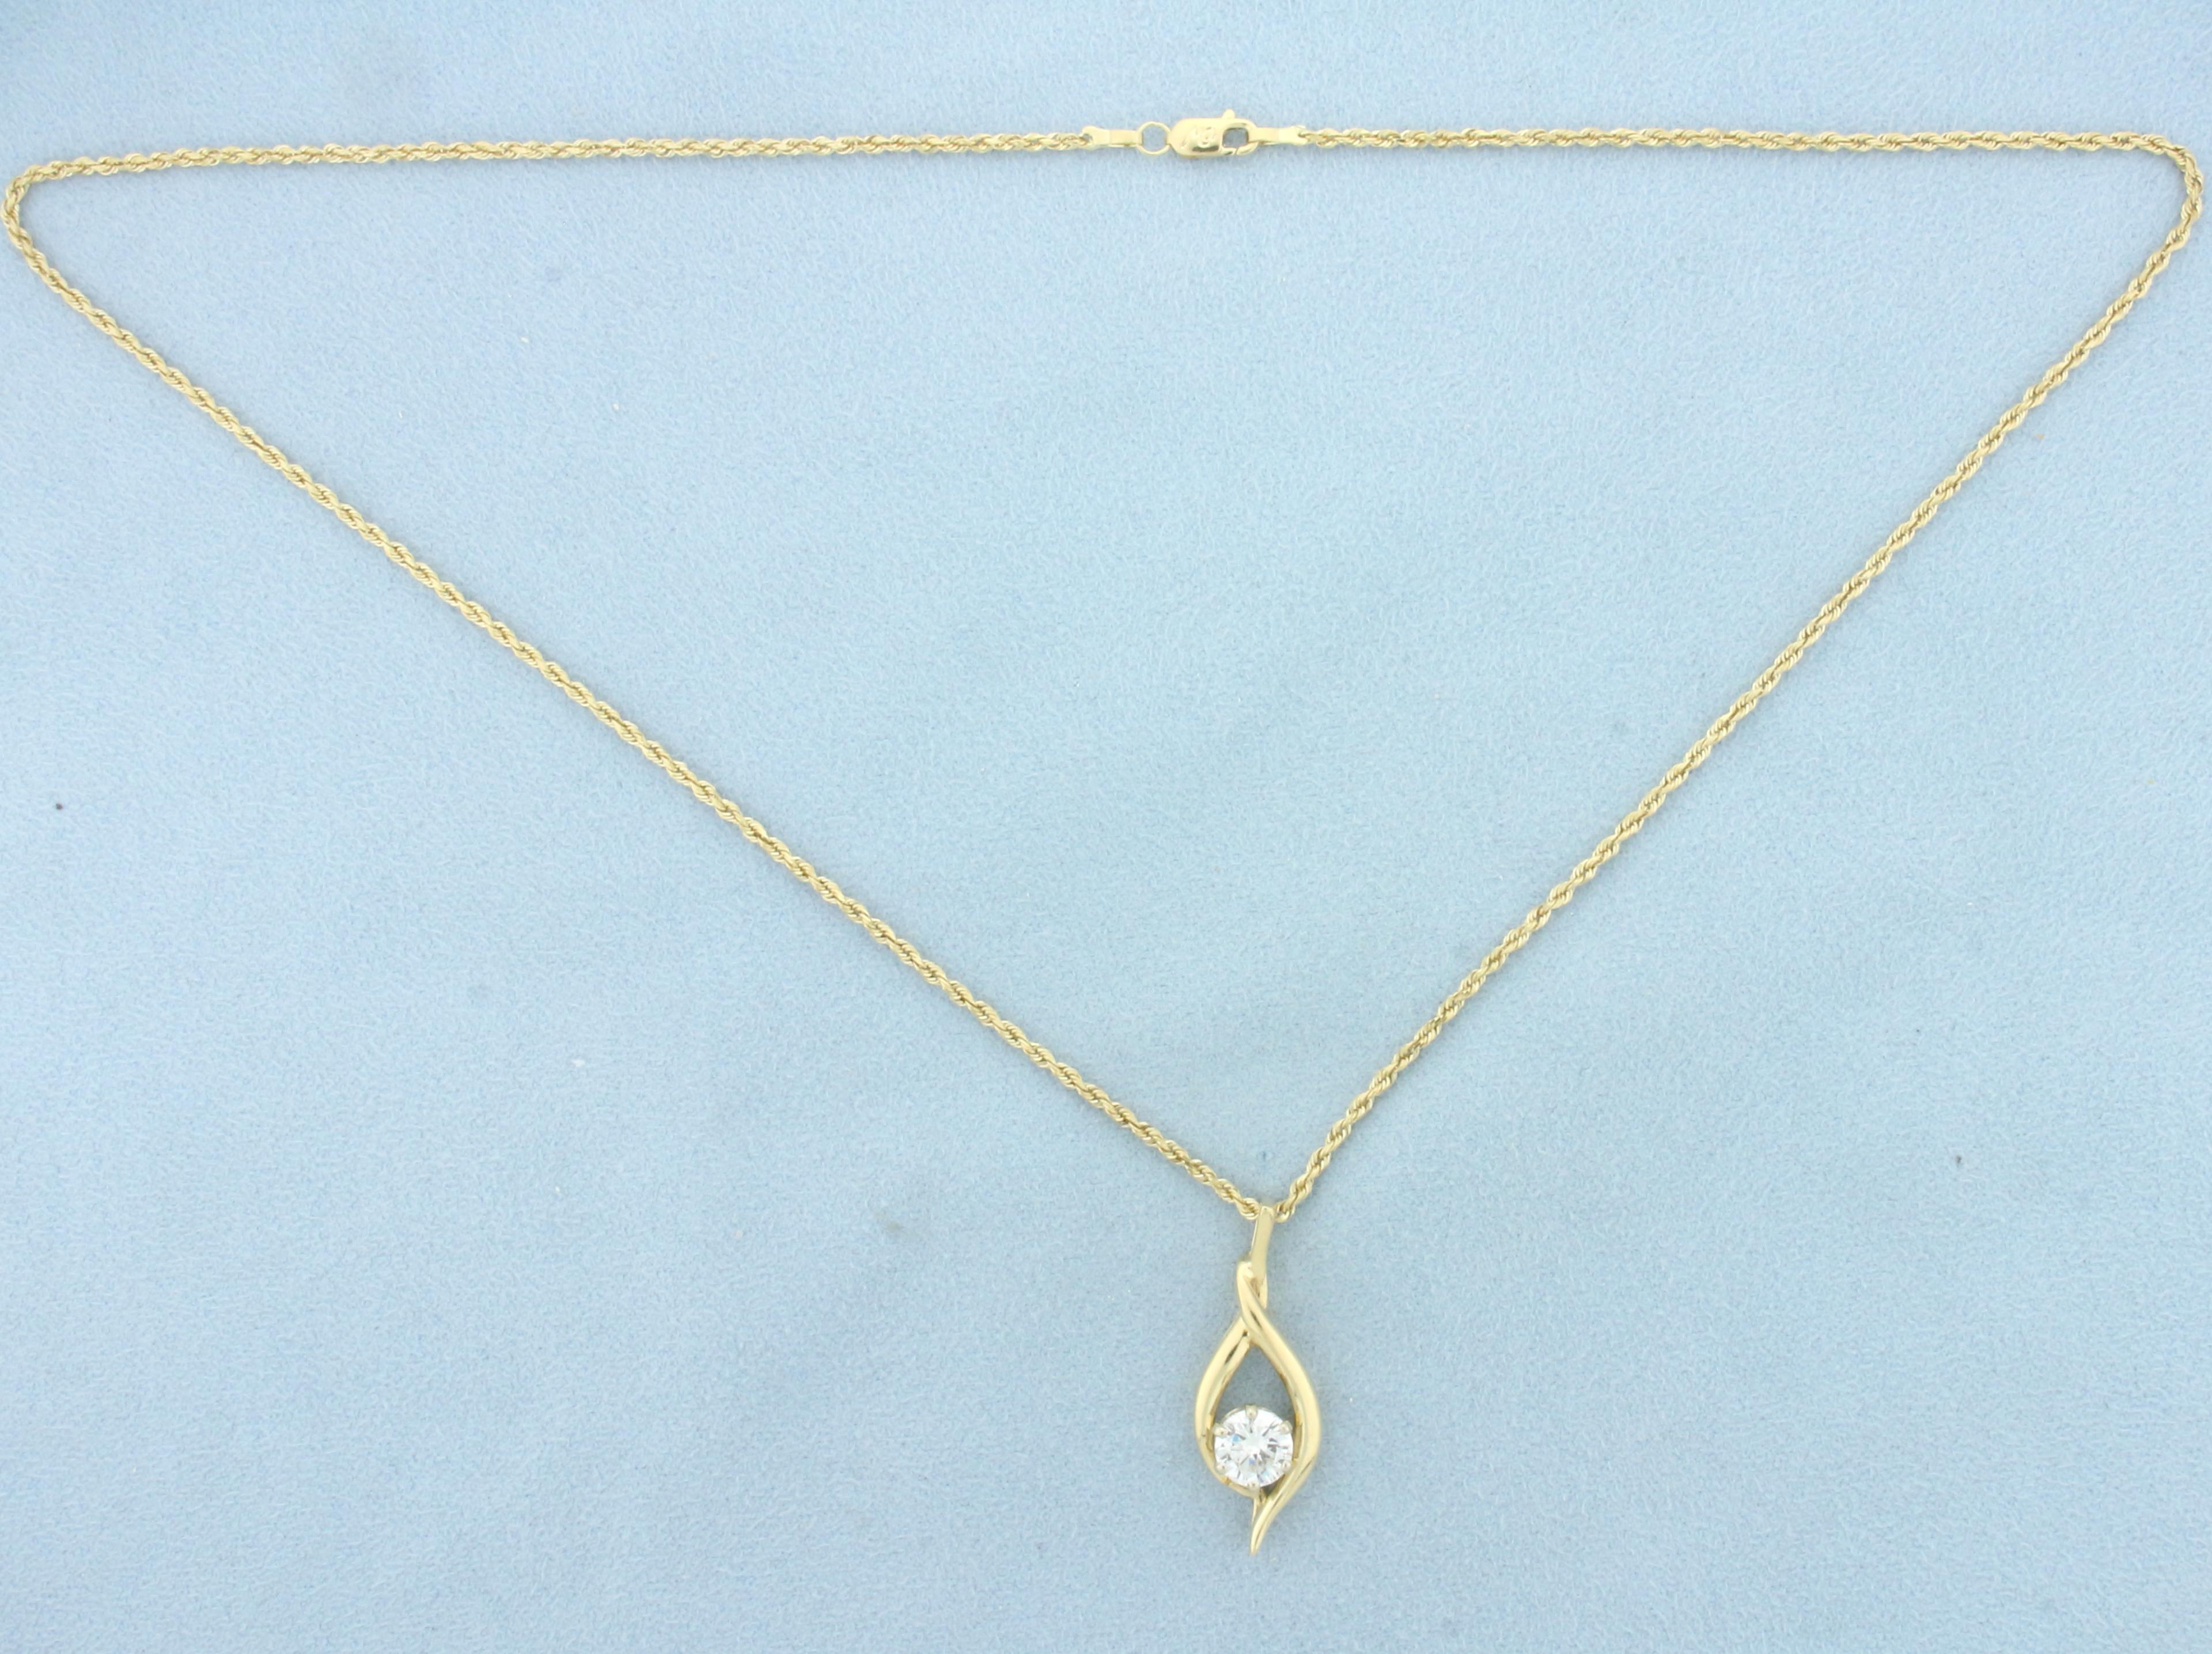 1ct Solitaire Diamond Necklace In 14k Yellow Gold